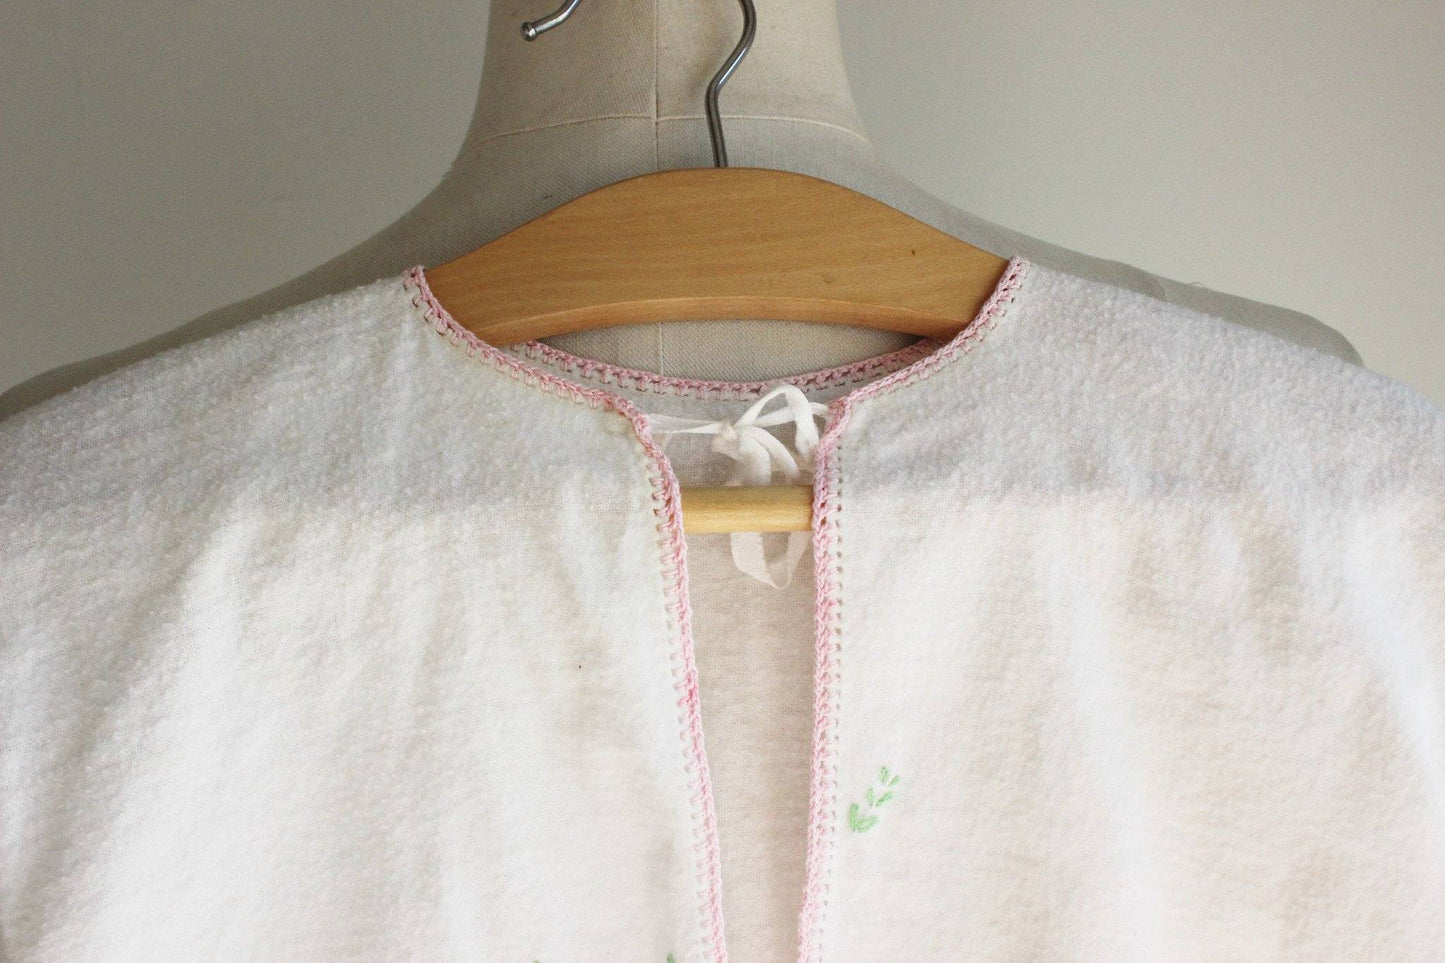 Vintage 1950s Baby Bed Jacket With Kitten Embroidery